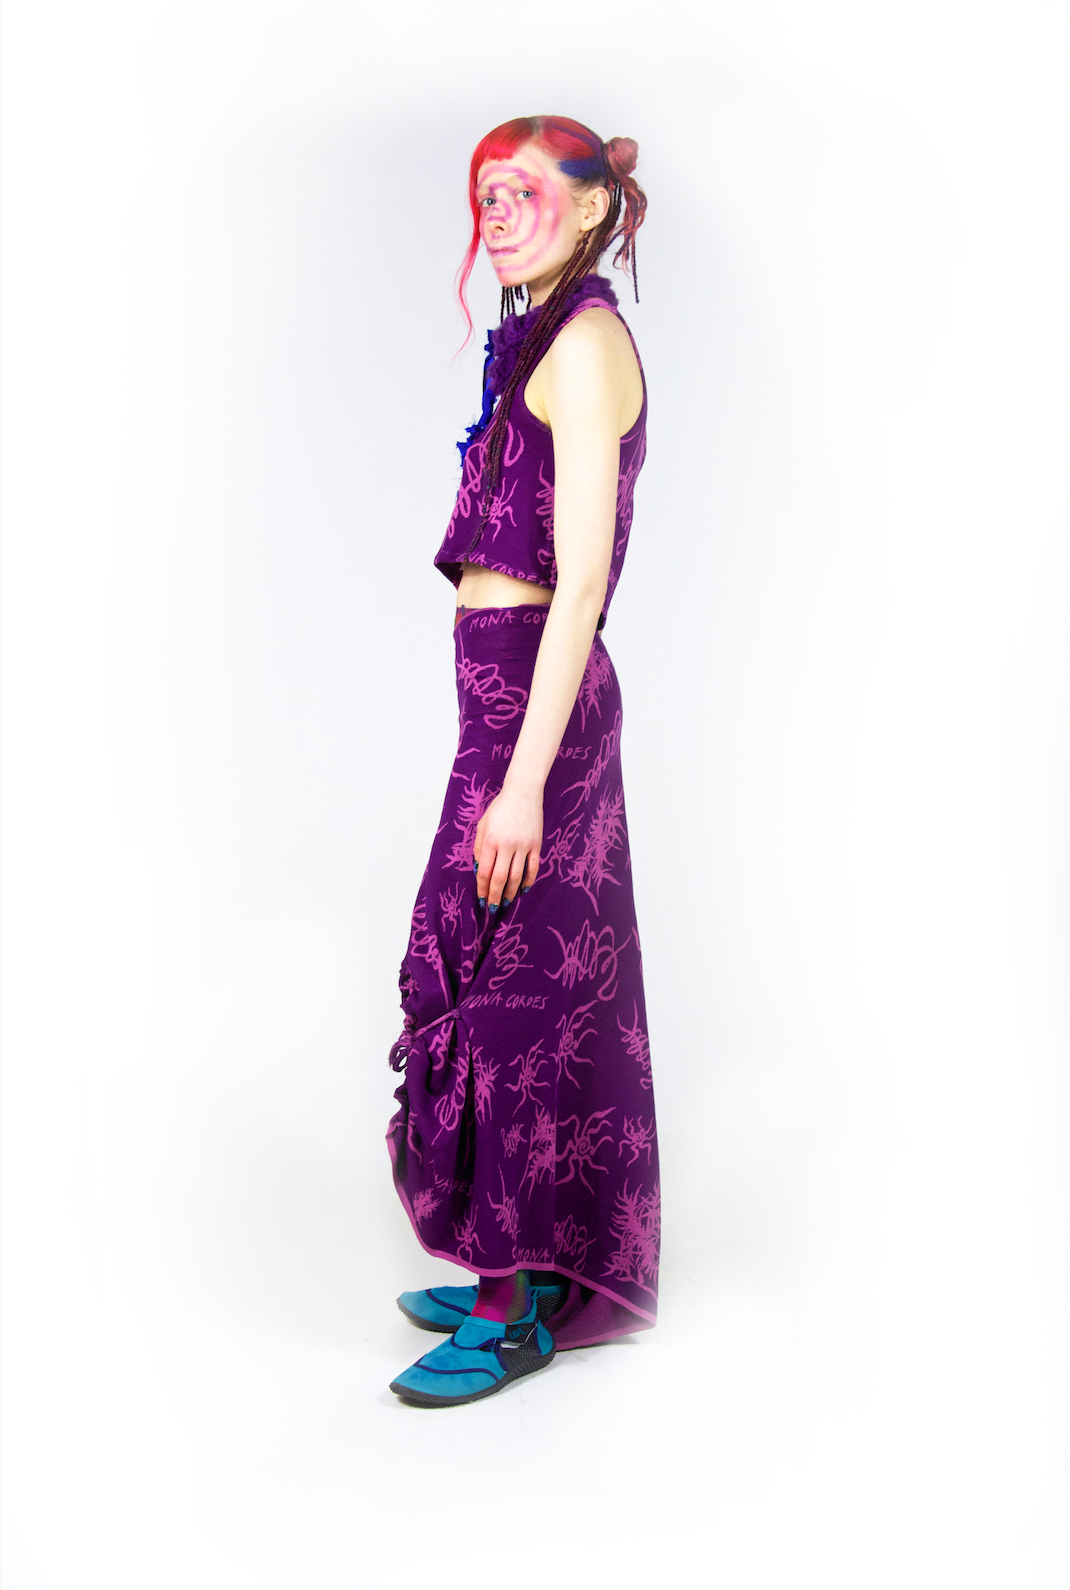 Model is standing sideways wearing a purple, printed two piece outfit. The top is a cropped tank top, and the bottom is a long skirt that hits right above the shoes. The model has colorful orange, pink and purple hair pulled back into a sleek bun with strands flowing out. The print of the dark purple outfit contains light, vibrant purplish pink squiggles and drawings that resemble bugs with long legs and leafy plants. 